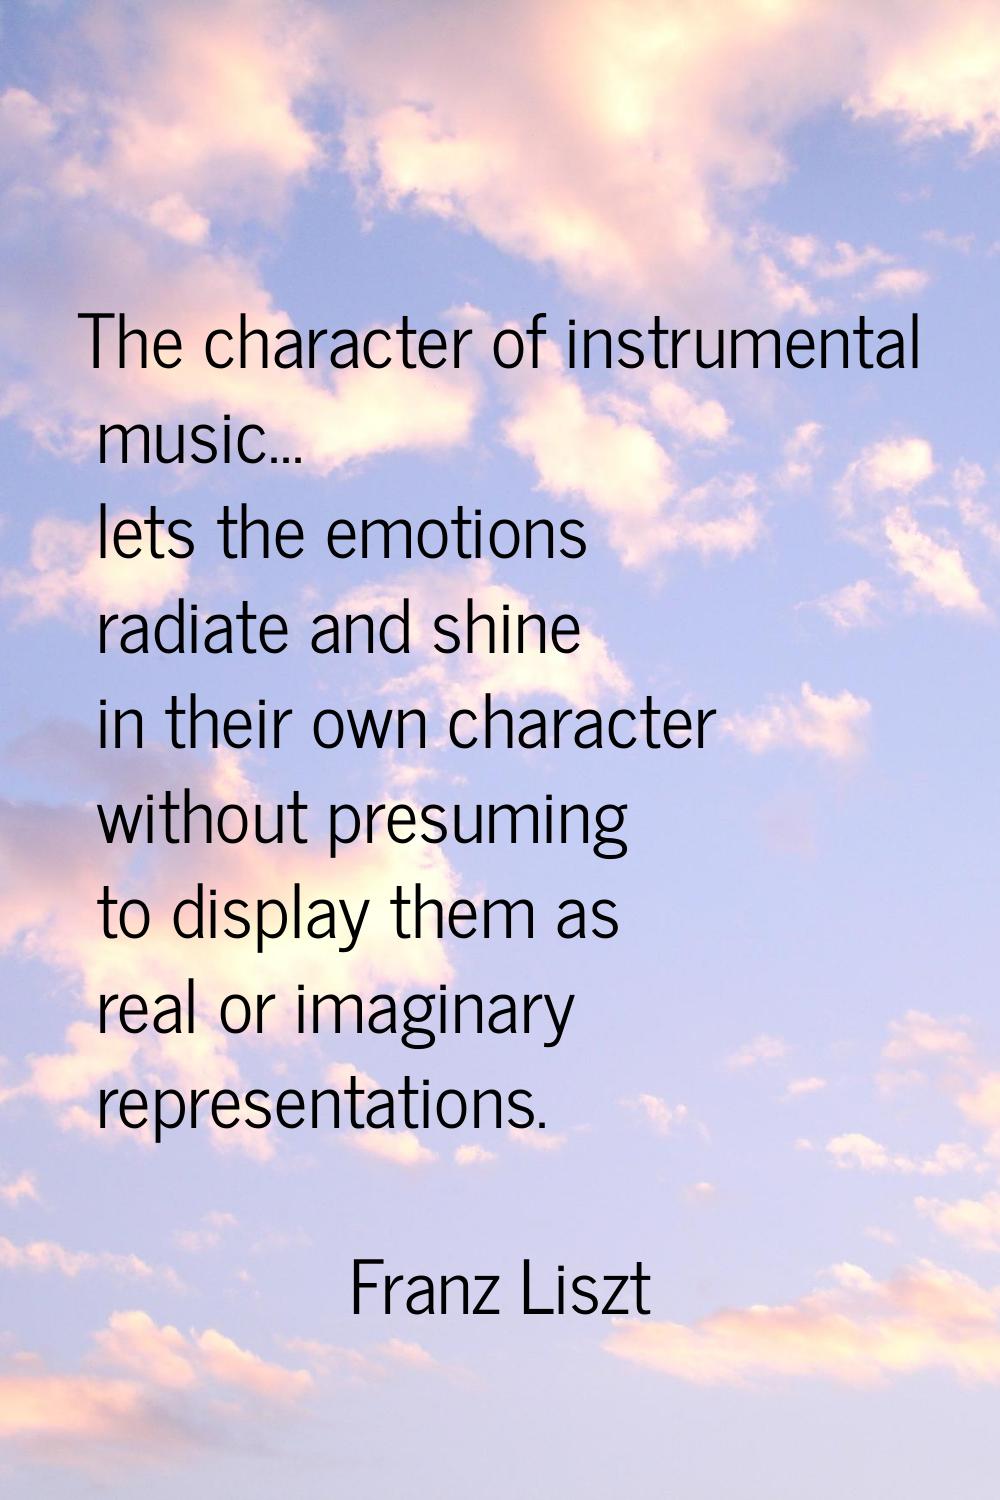 The character of instrumental music... lets the emotions radiate and shine in their own character w